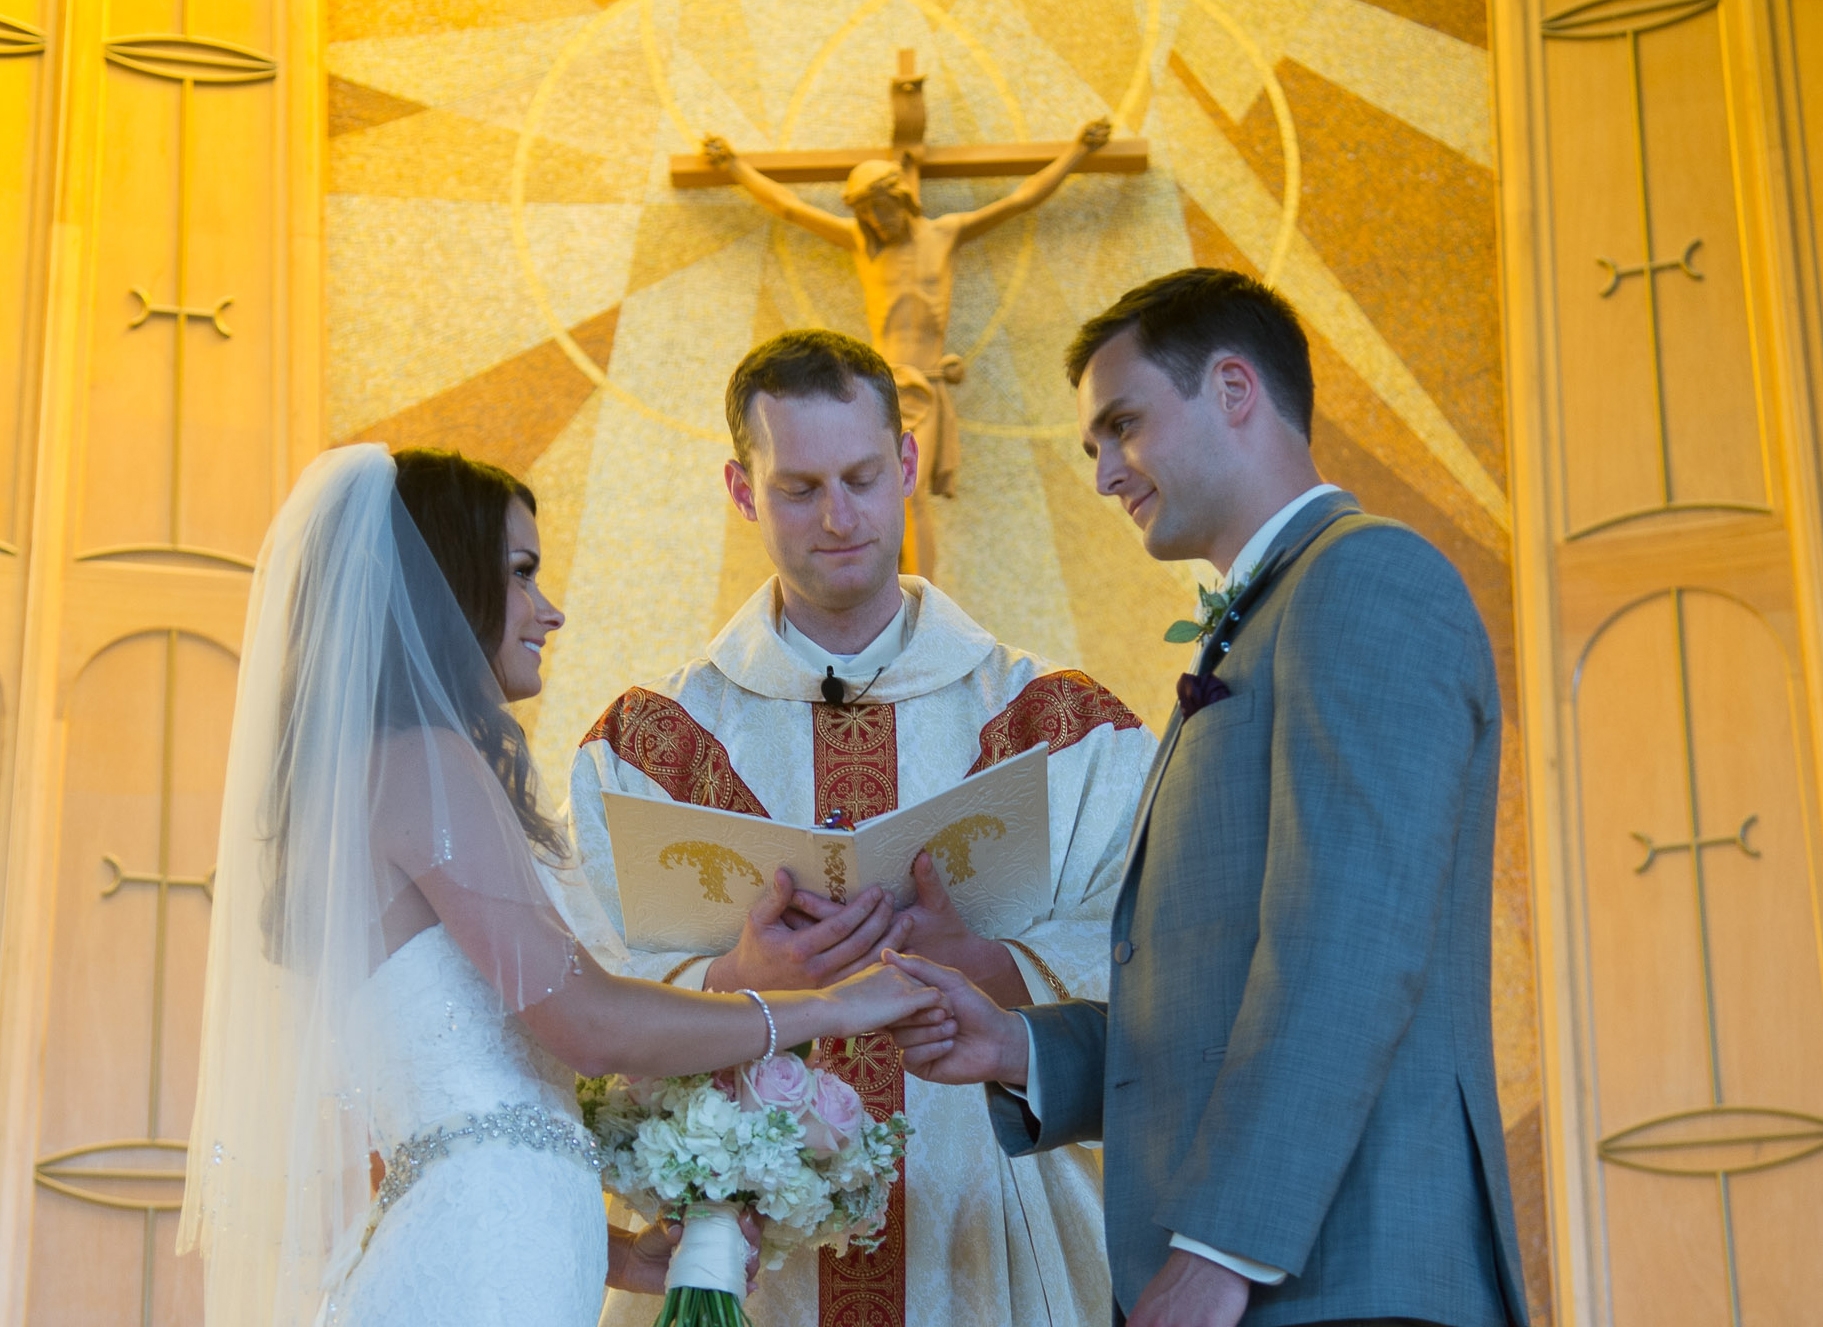 Bryce and Johnna Comfort's wedding, July 26th, 2013 at St. Charles Borromeo in Tacoma. marriage, crucifix, priest.